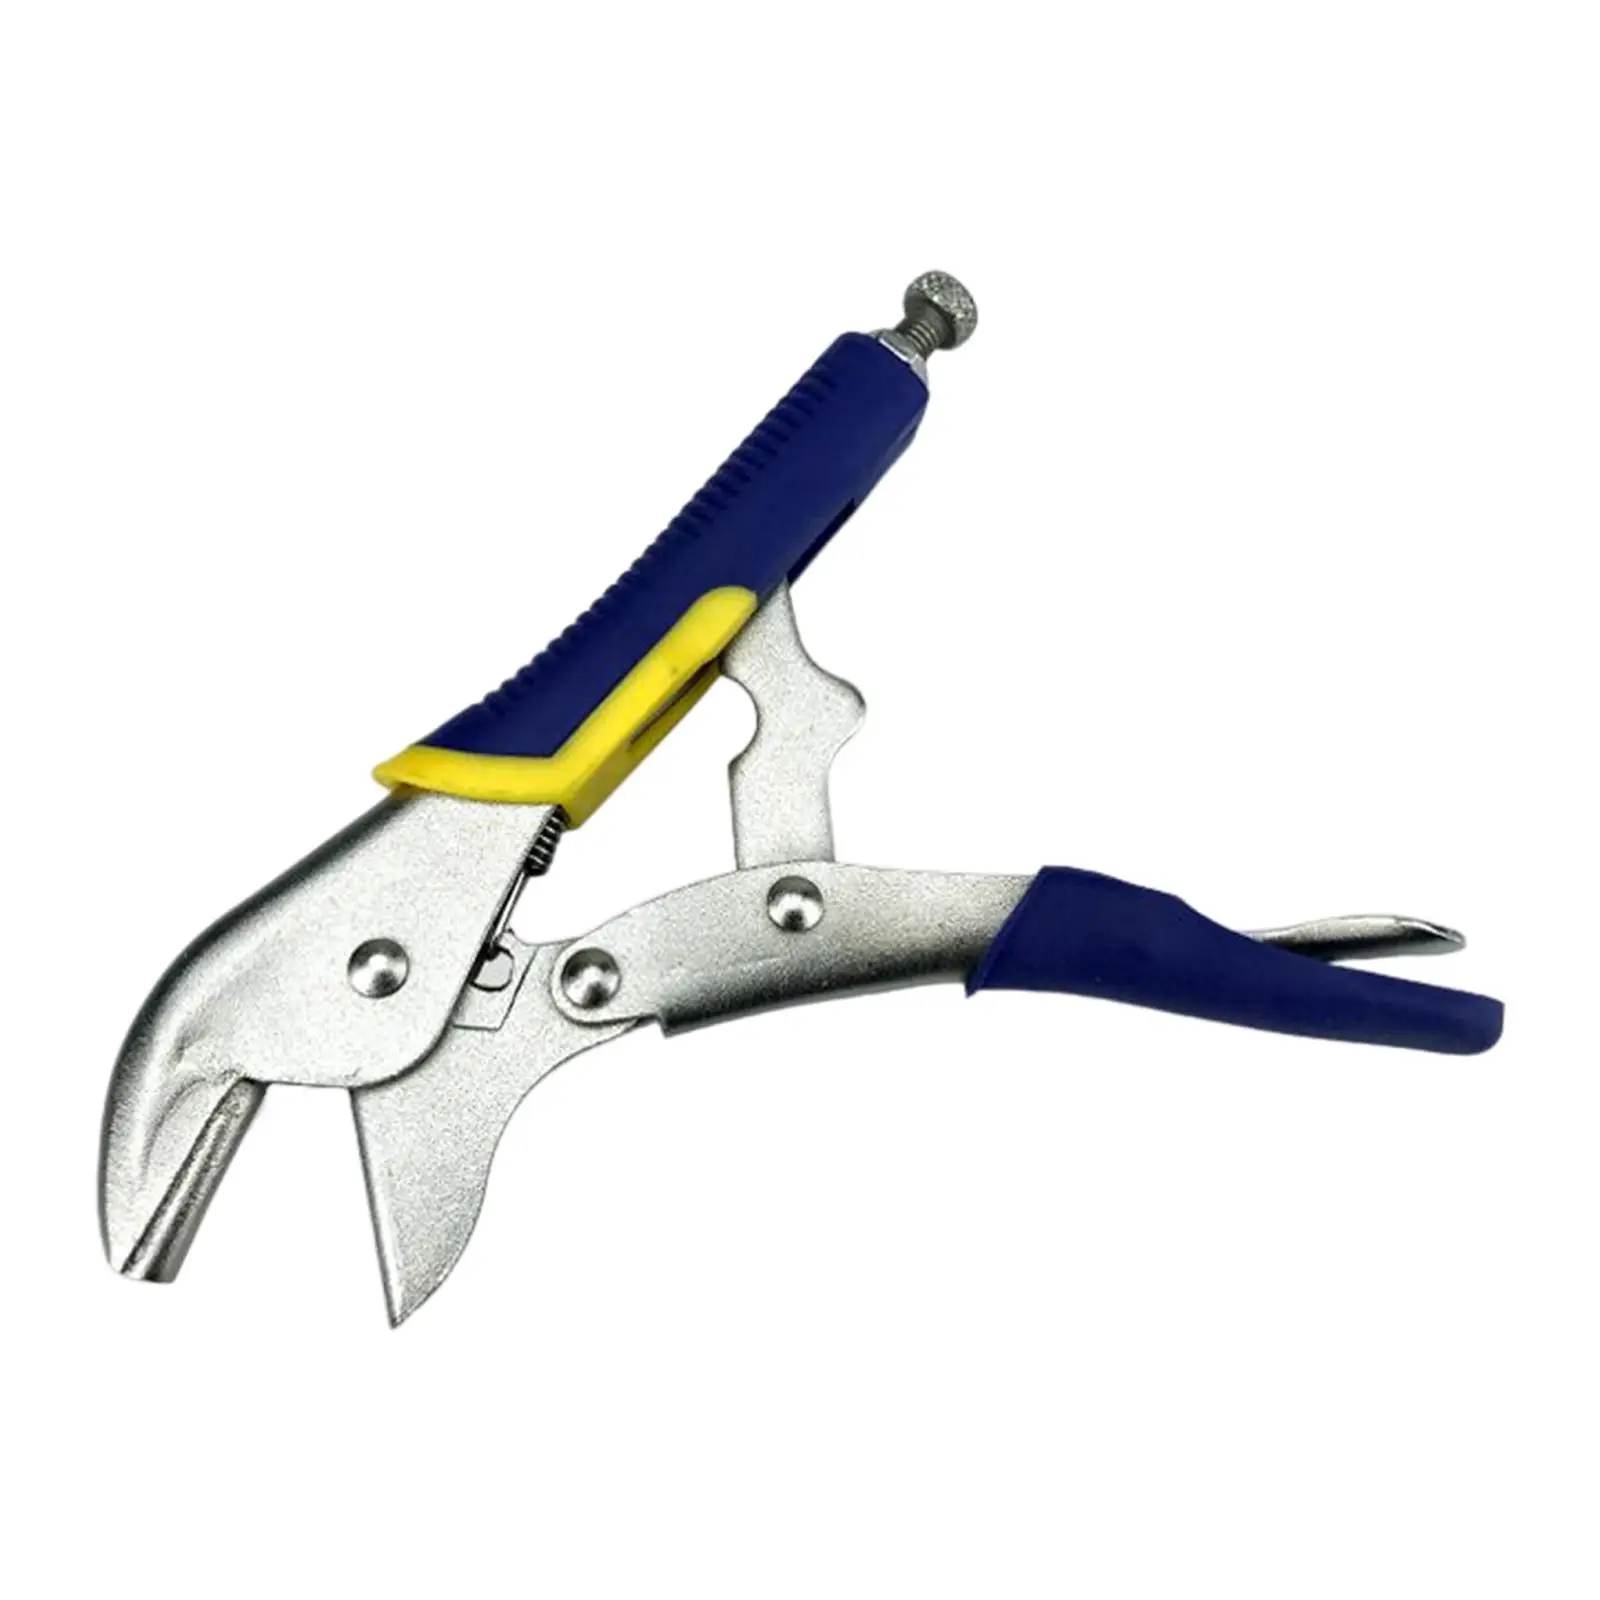 B Type Pinch Pliers Seal Plier Locking Pliers for Shop Automotive Home